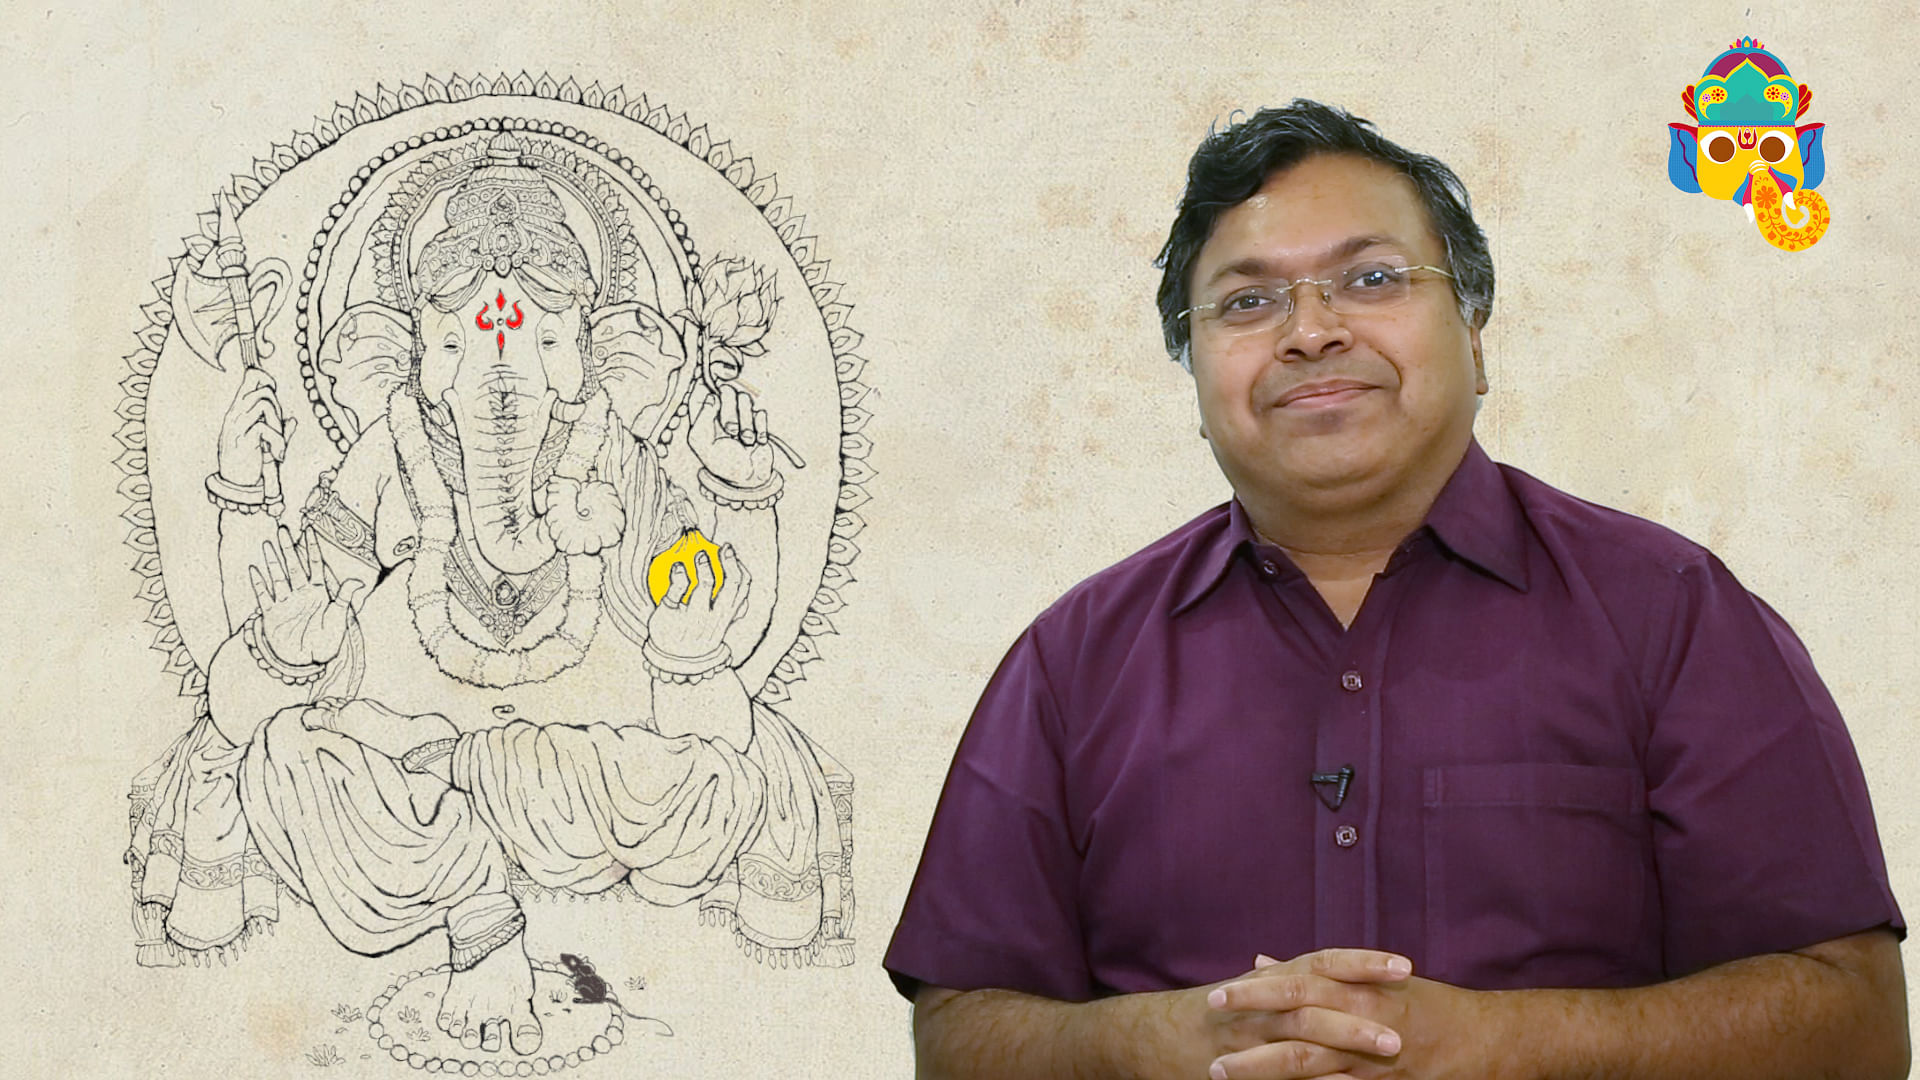 Devdutt Pattanaik explains the annual arrival and departure of Lord Ganesha and its connection with our lives.